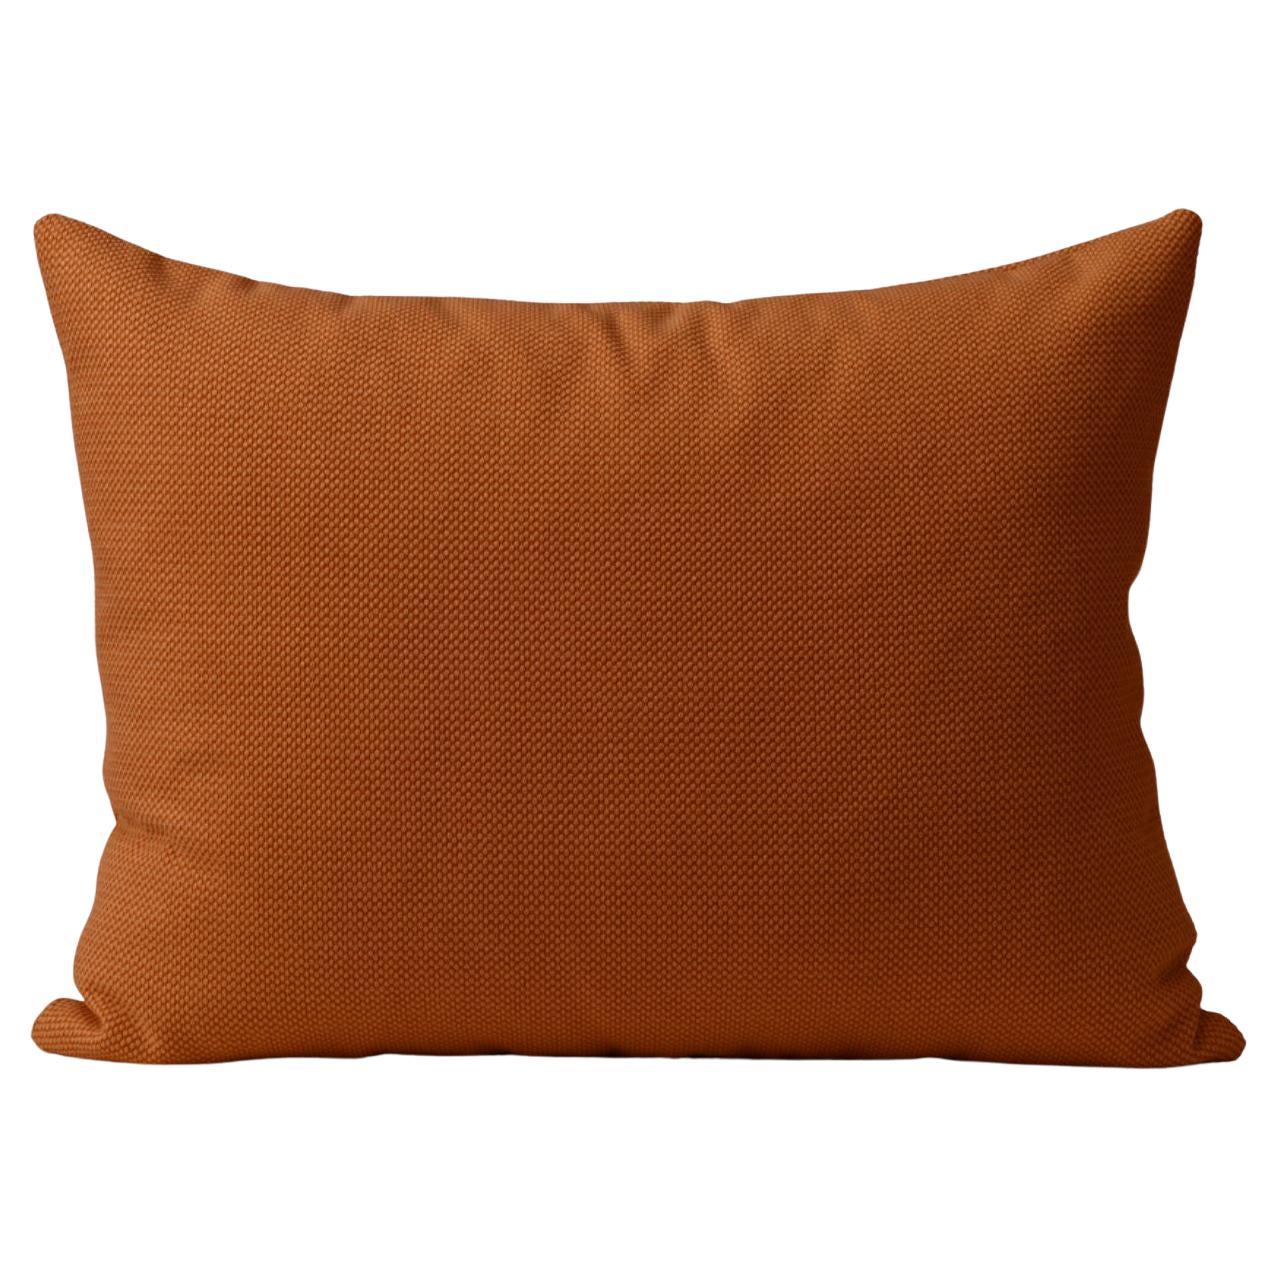 Galore Cushion Square Terracotta by Warm Nordic